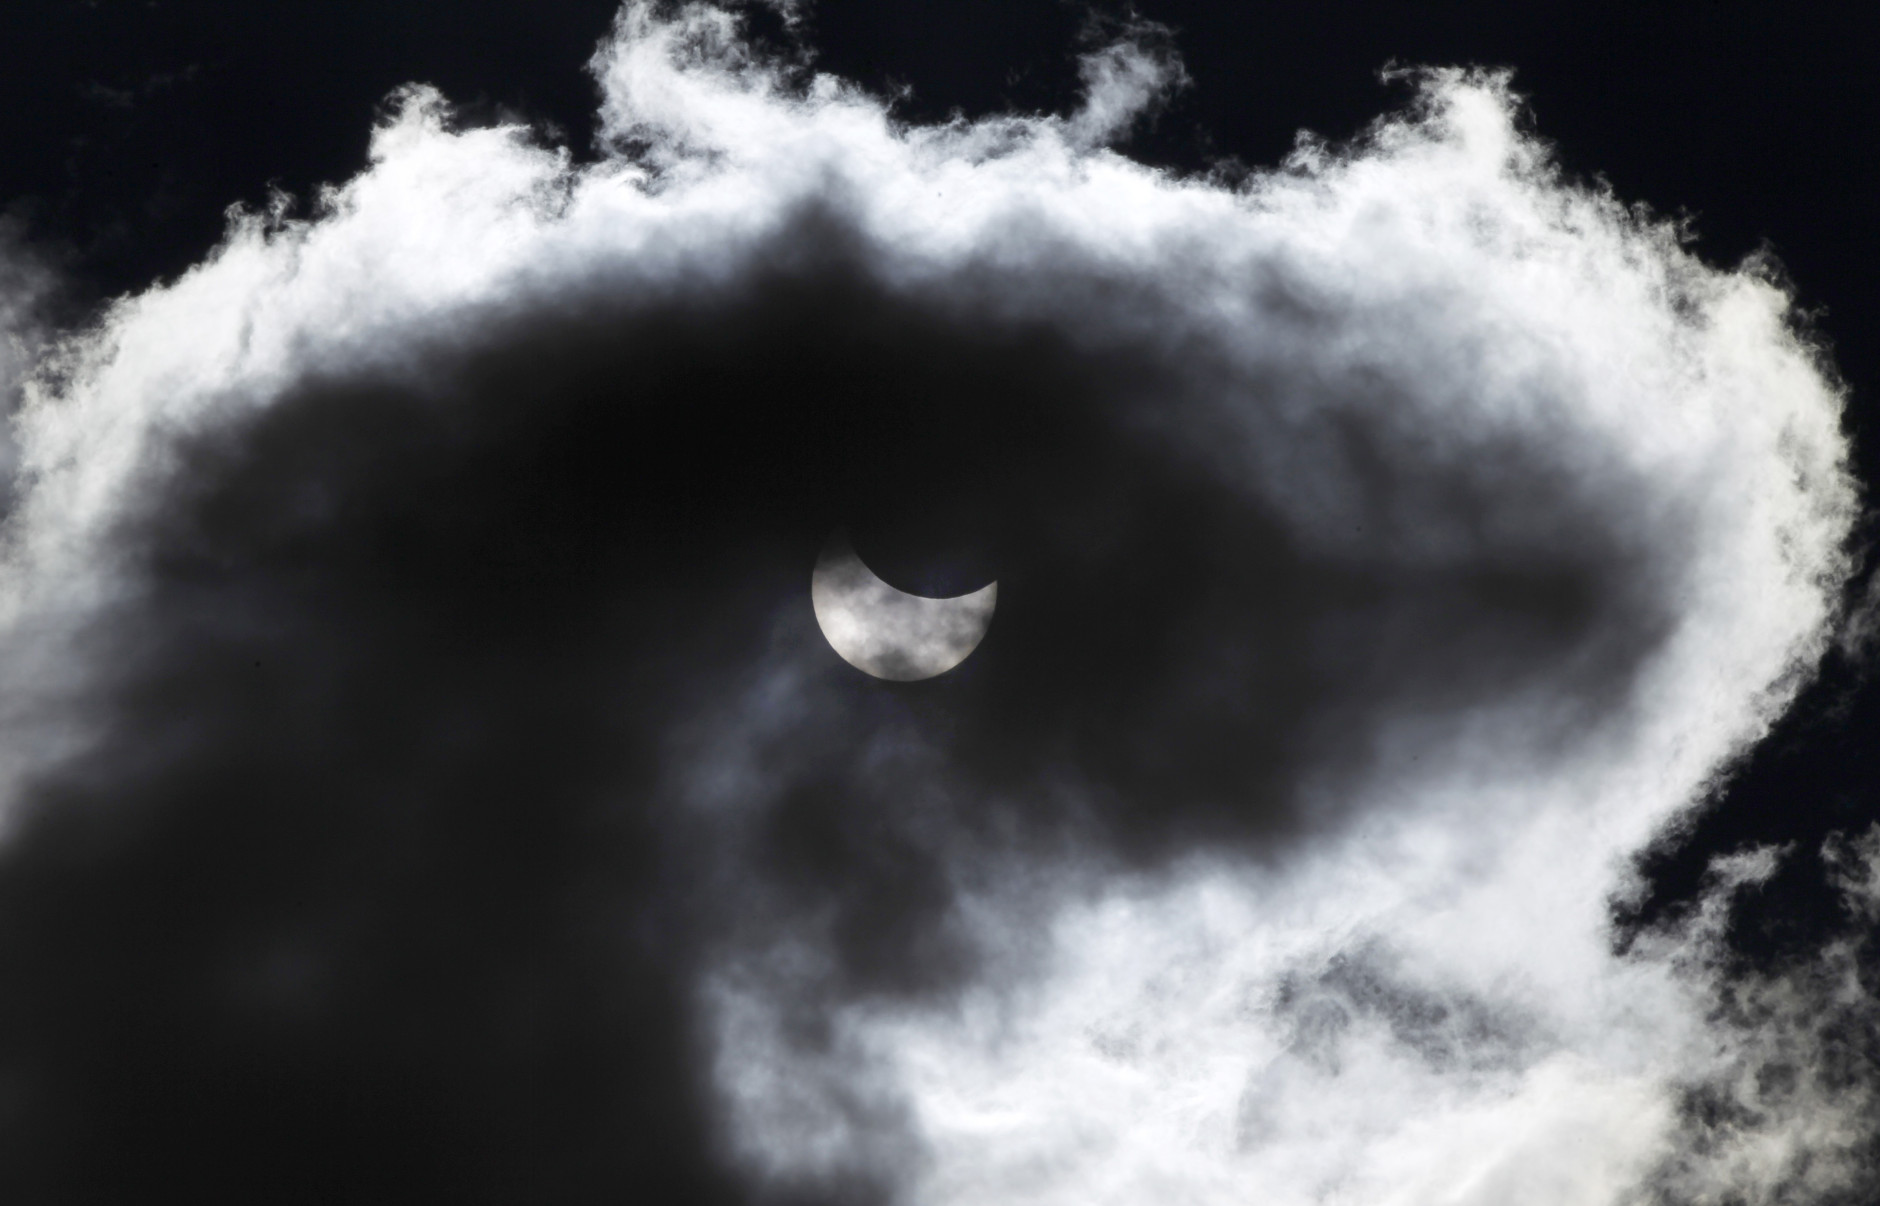 The moon starts to block the sun during a solar eclipse seen through a cloud, in Skopje, Macedonia, Friday, March 20, 2015. An eclipse, a rare solar event, is darkening parts of Europe on Friday in the last total solar eclipse in Europe for over a decade (AP Photo/Boris Grdanoski)